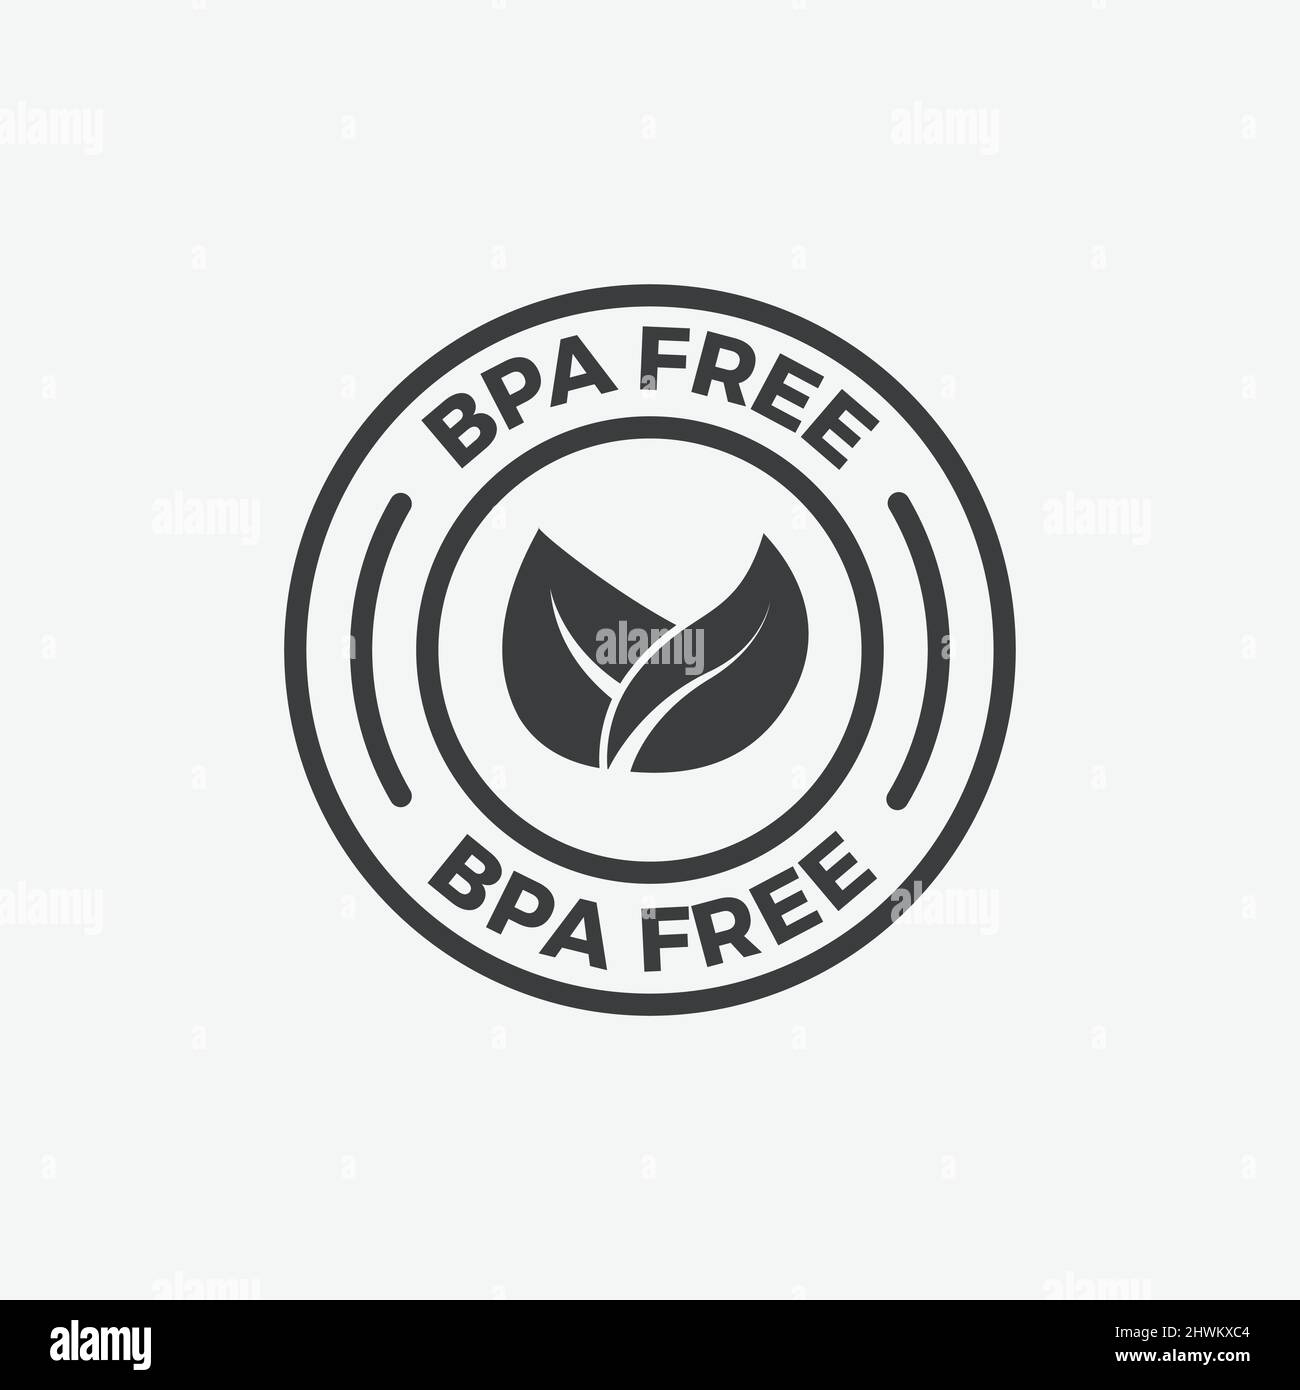 BPA FREE bisphenol A and phthalates free icon vector non toxic plastic sign  for graphic design, logo, website, social media, mobile app, UI  illustration 9971712 Vector Art at Vecteezy